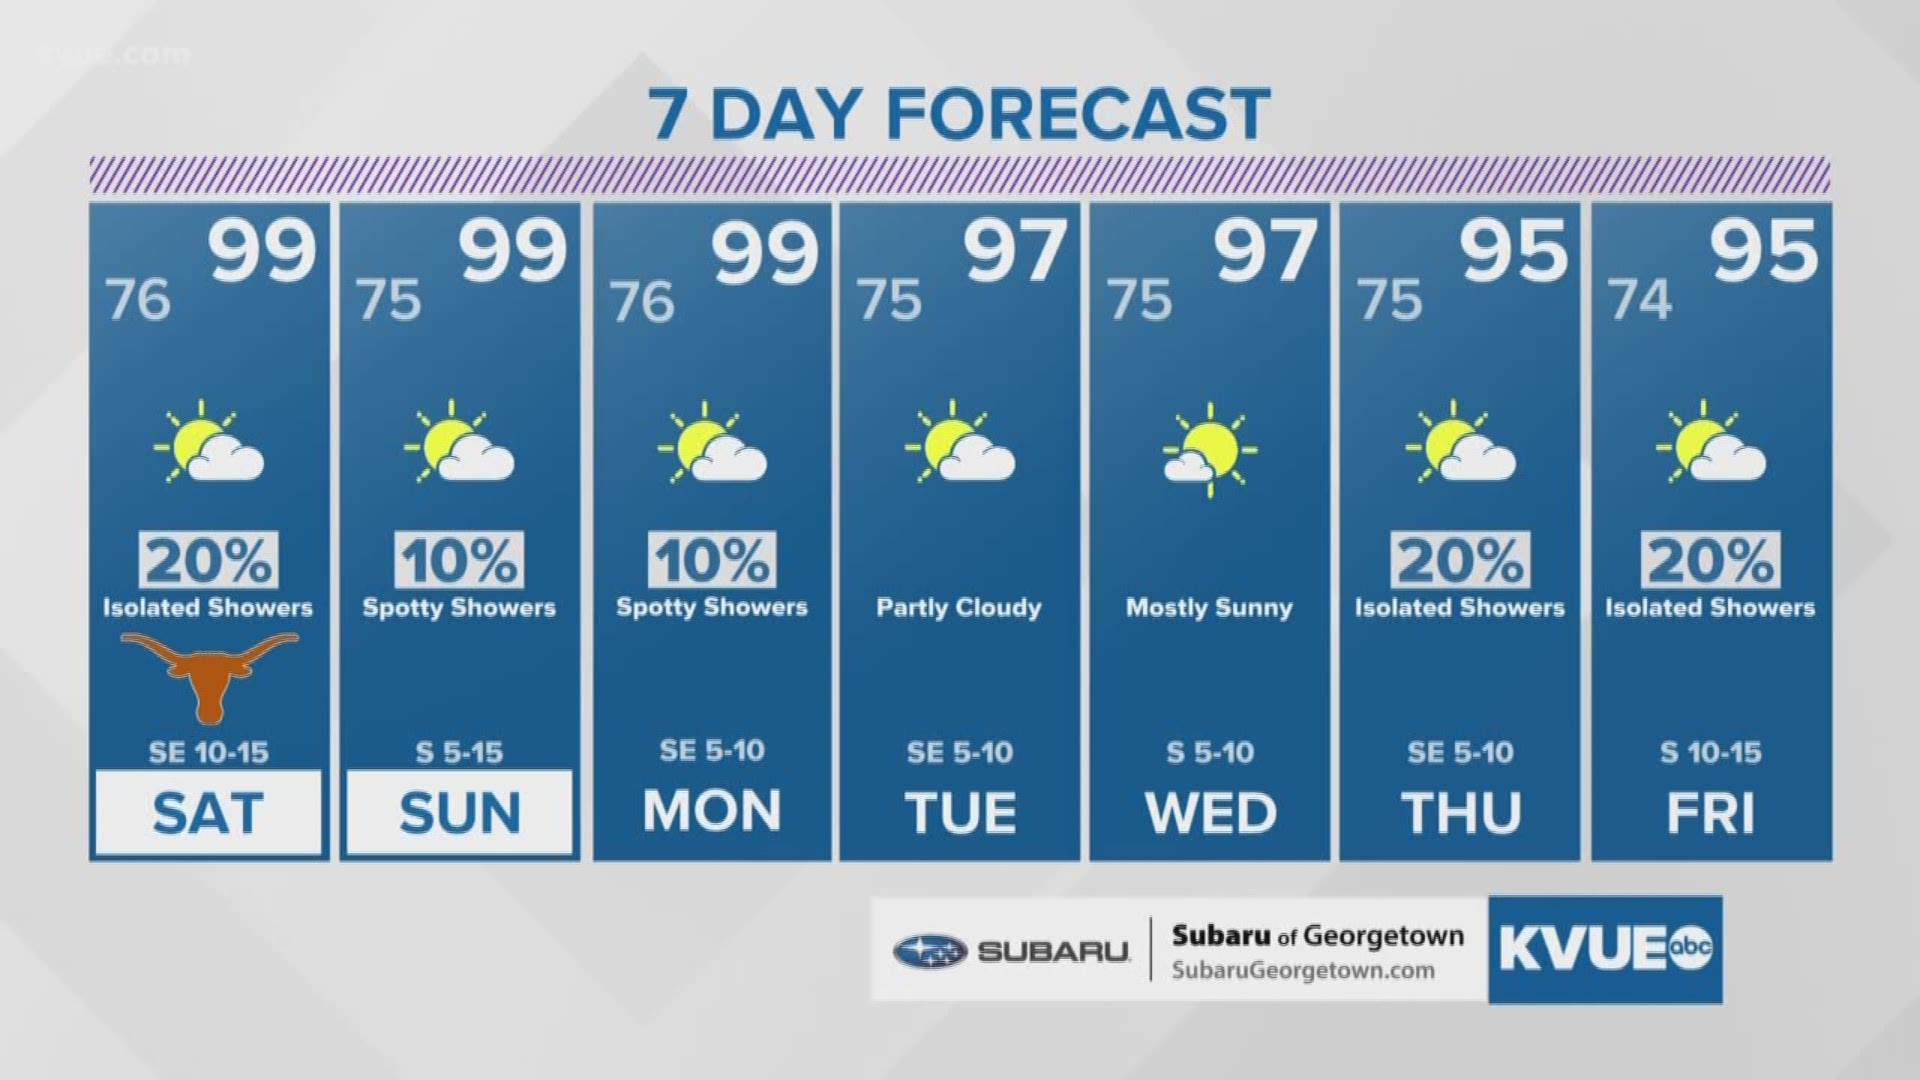 Hot and humid weekend